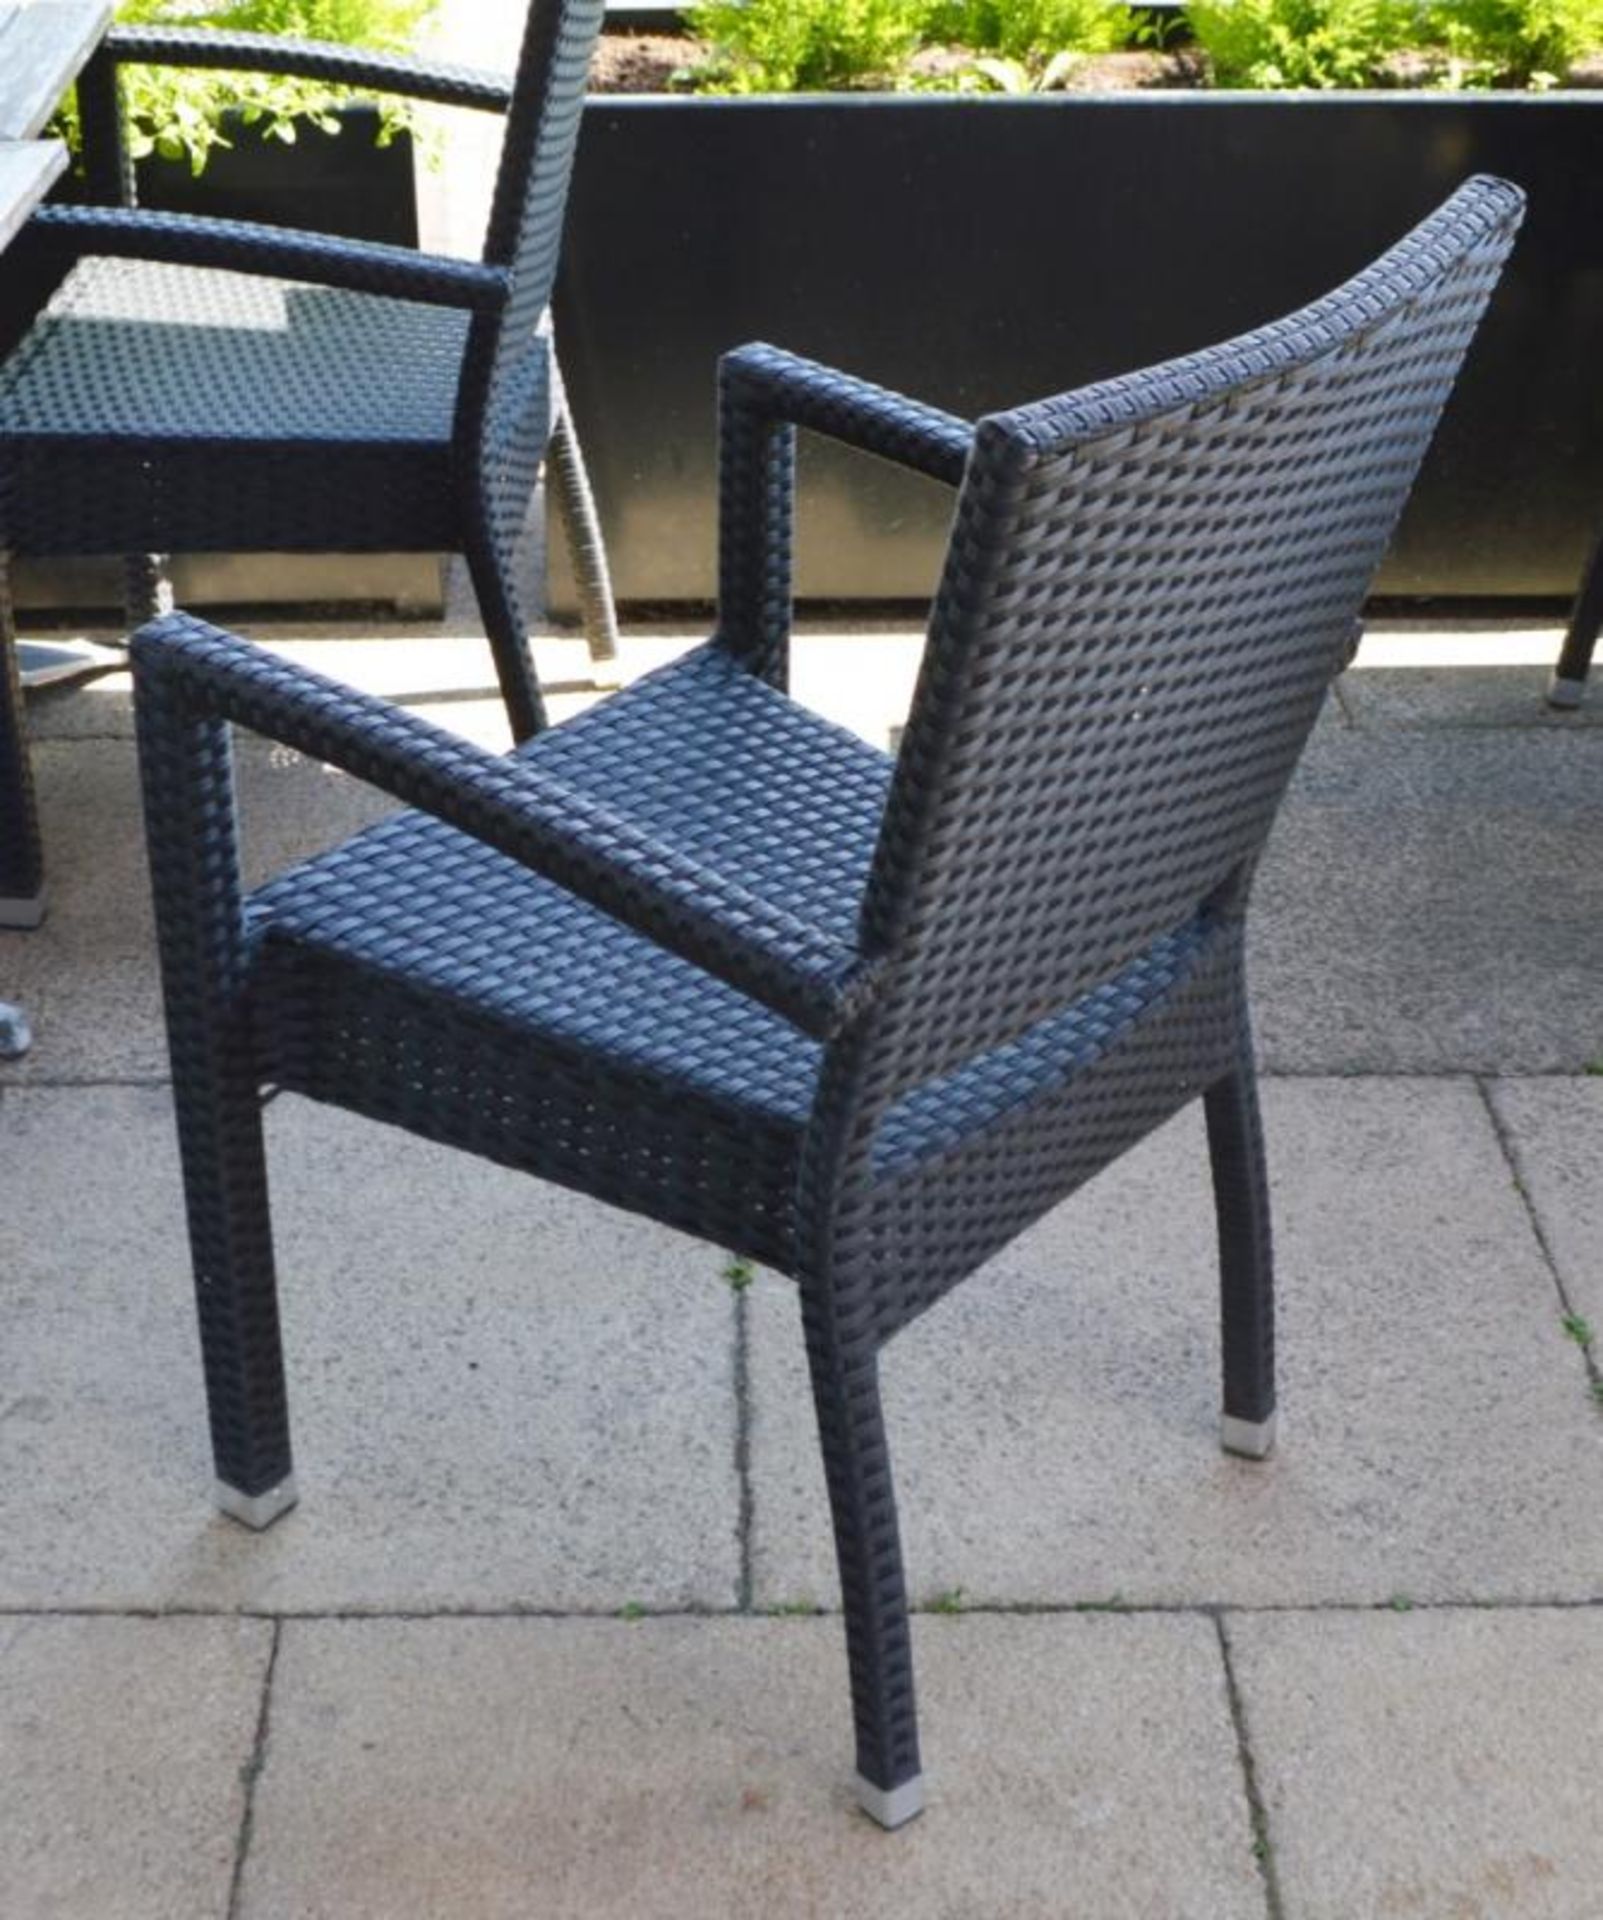 1 x Bistro Garden Table & Chair Set to Include 2 x Tables and 4 x Rattan Charcoal Garden Chairs - - Image 7 of 8